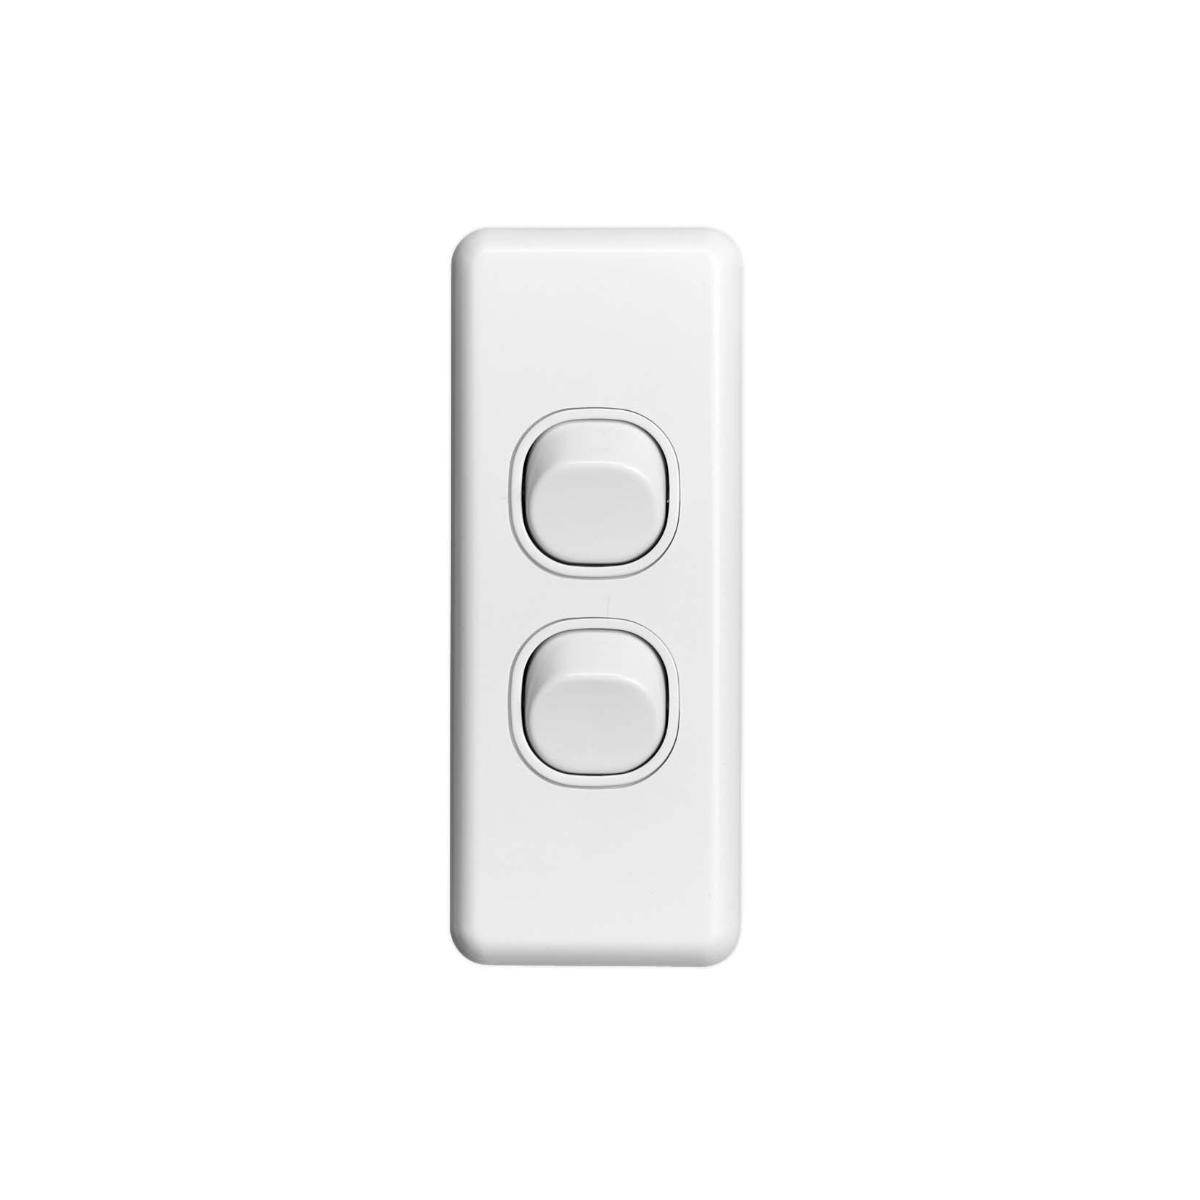 SWITCH 2GANG ARCHITRAVE 10A WHITE